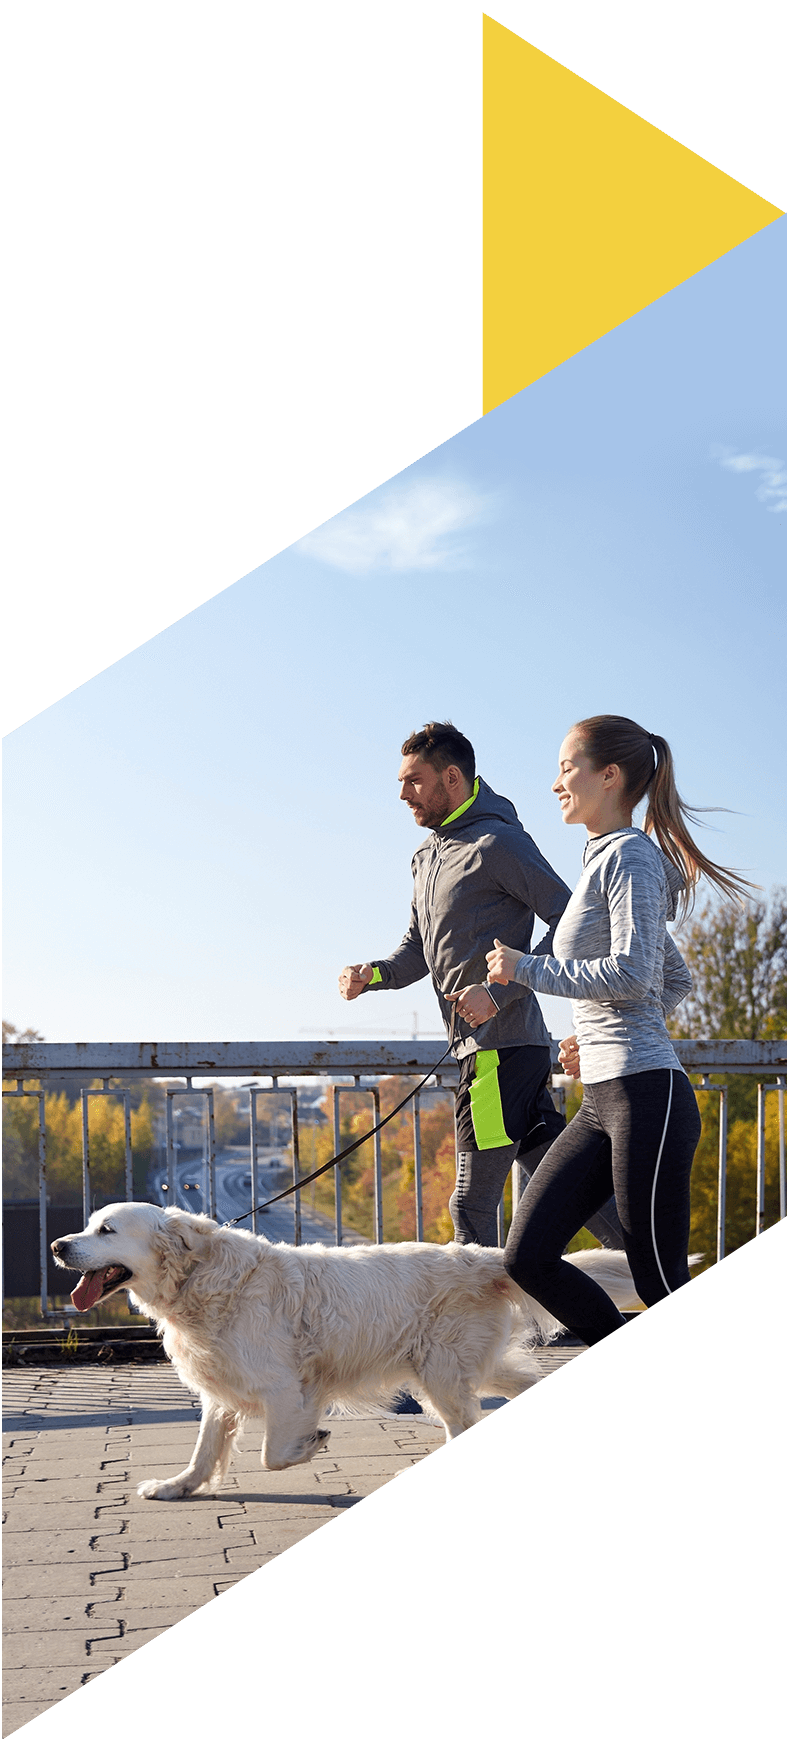 Image showing a couple jogging with their dog